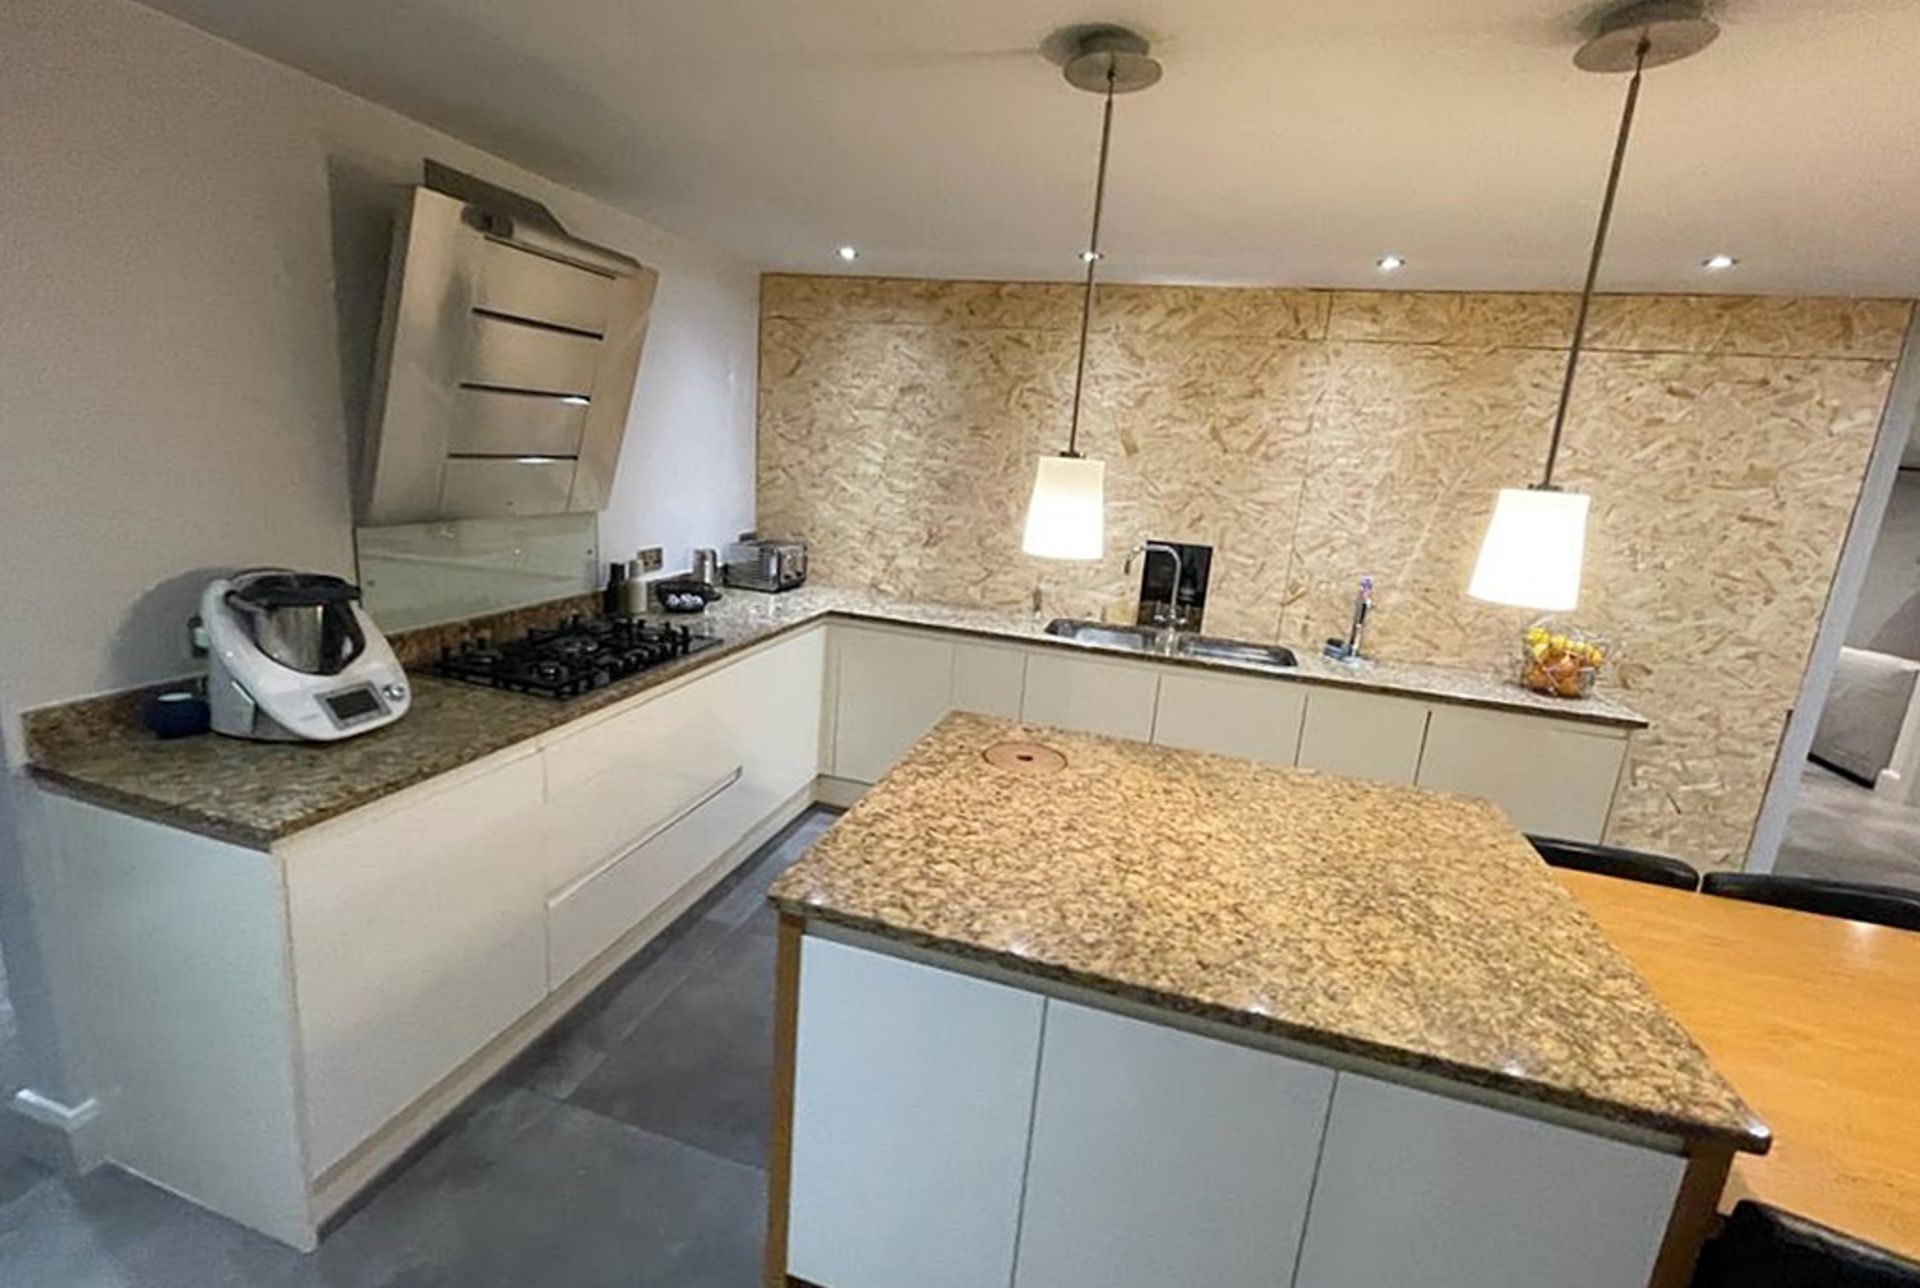 1 x Stunning PARAPAN Handleless Fitted Kitchen with Neff Appliances, Granite Worktops & Island - Image 8 of 126